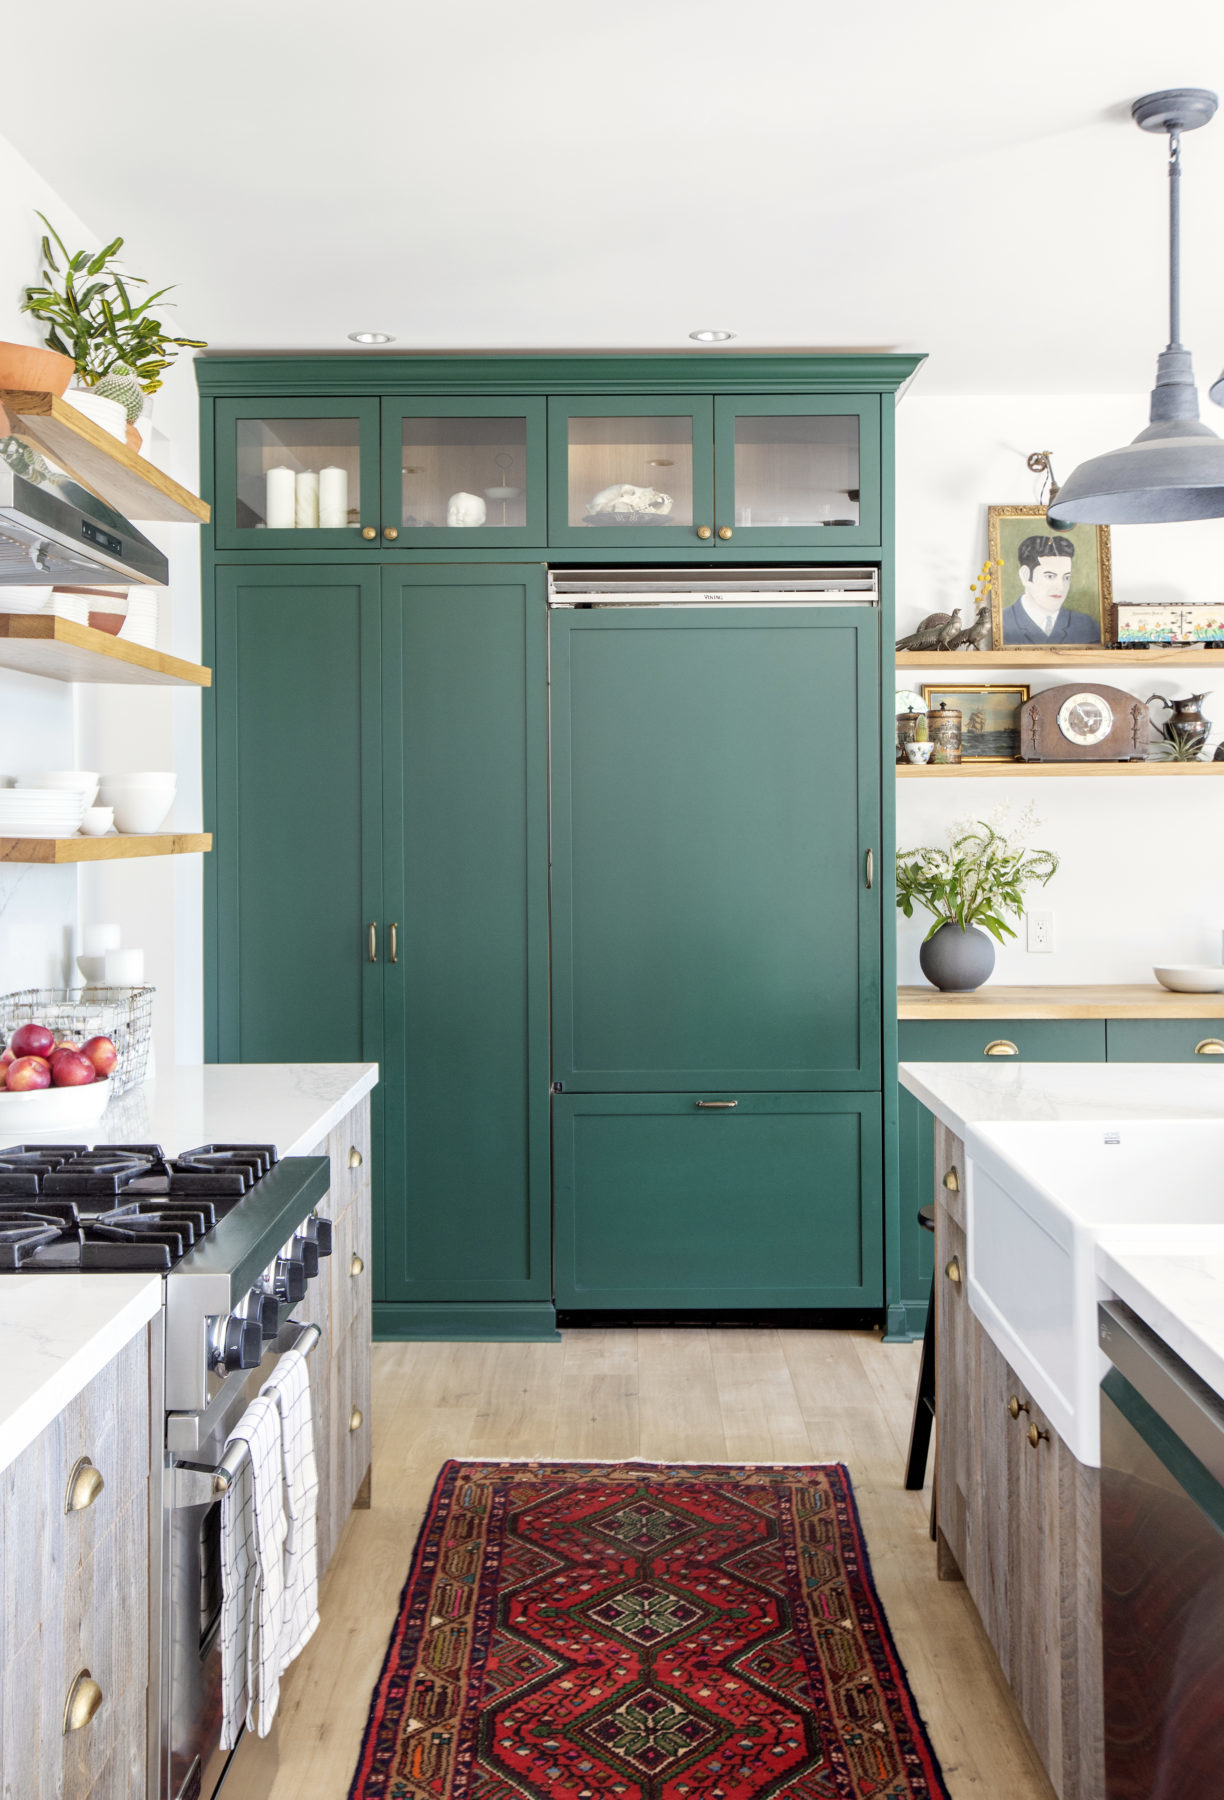 Custom Green painted kitchen cabinets